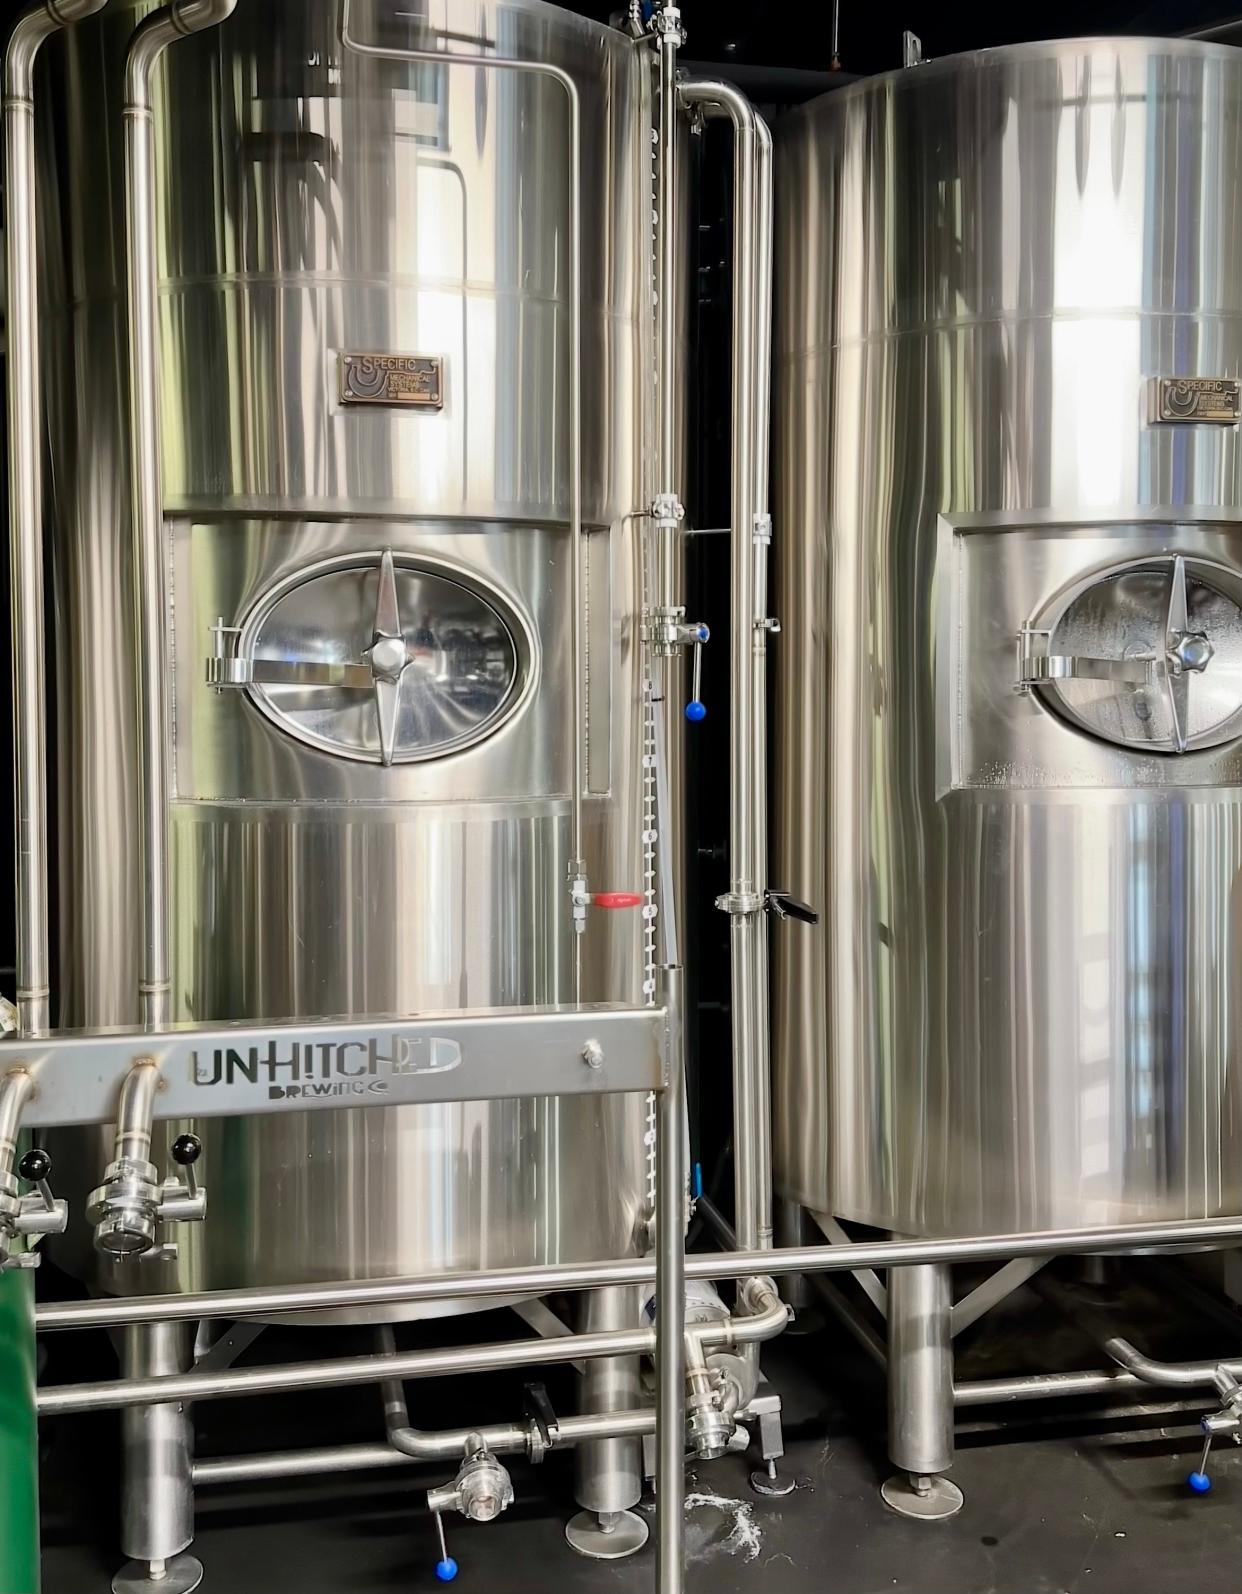 Two of the brew tanks at UnHitched Brewing Company in Louisville.